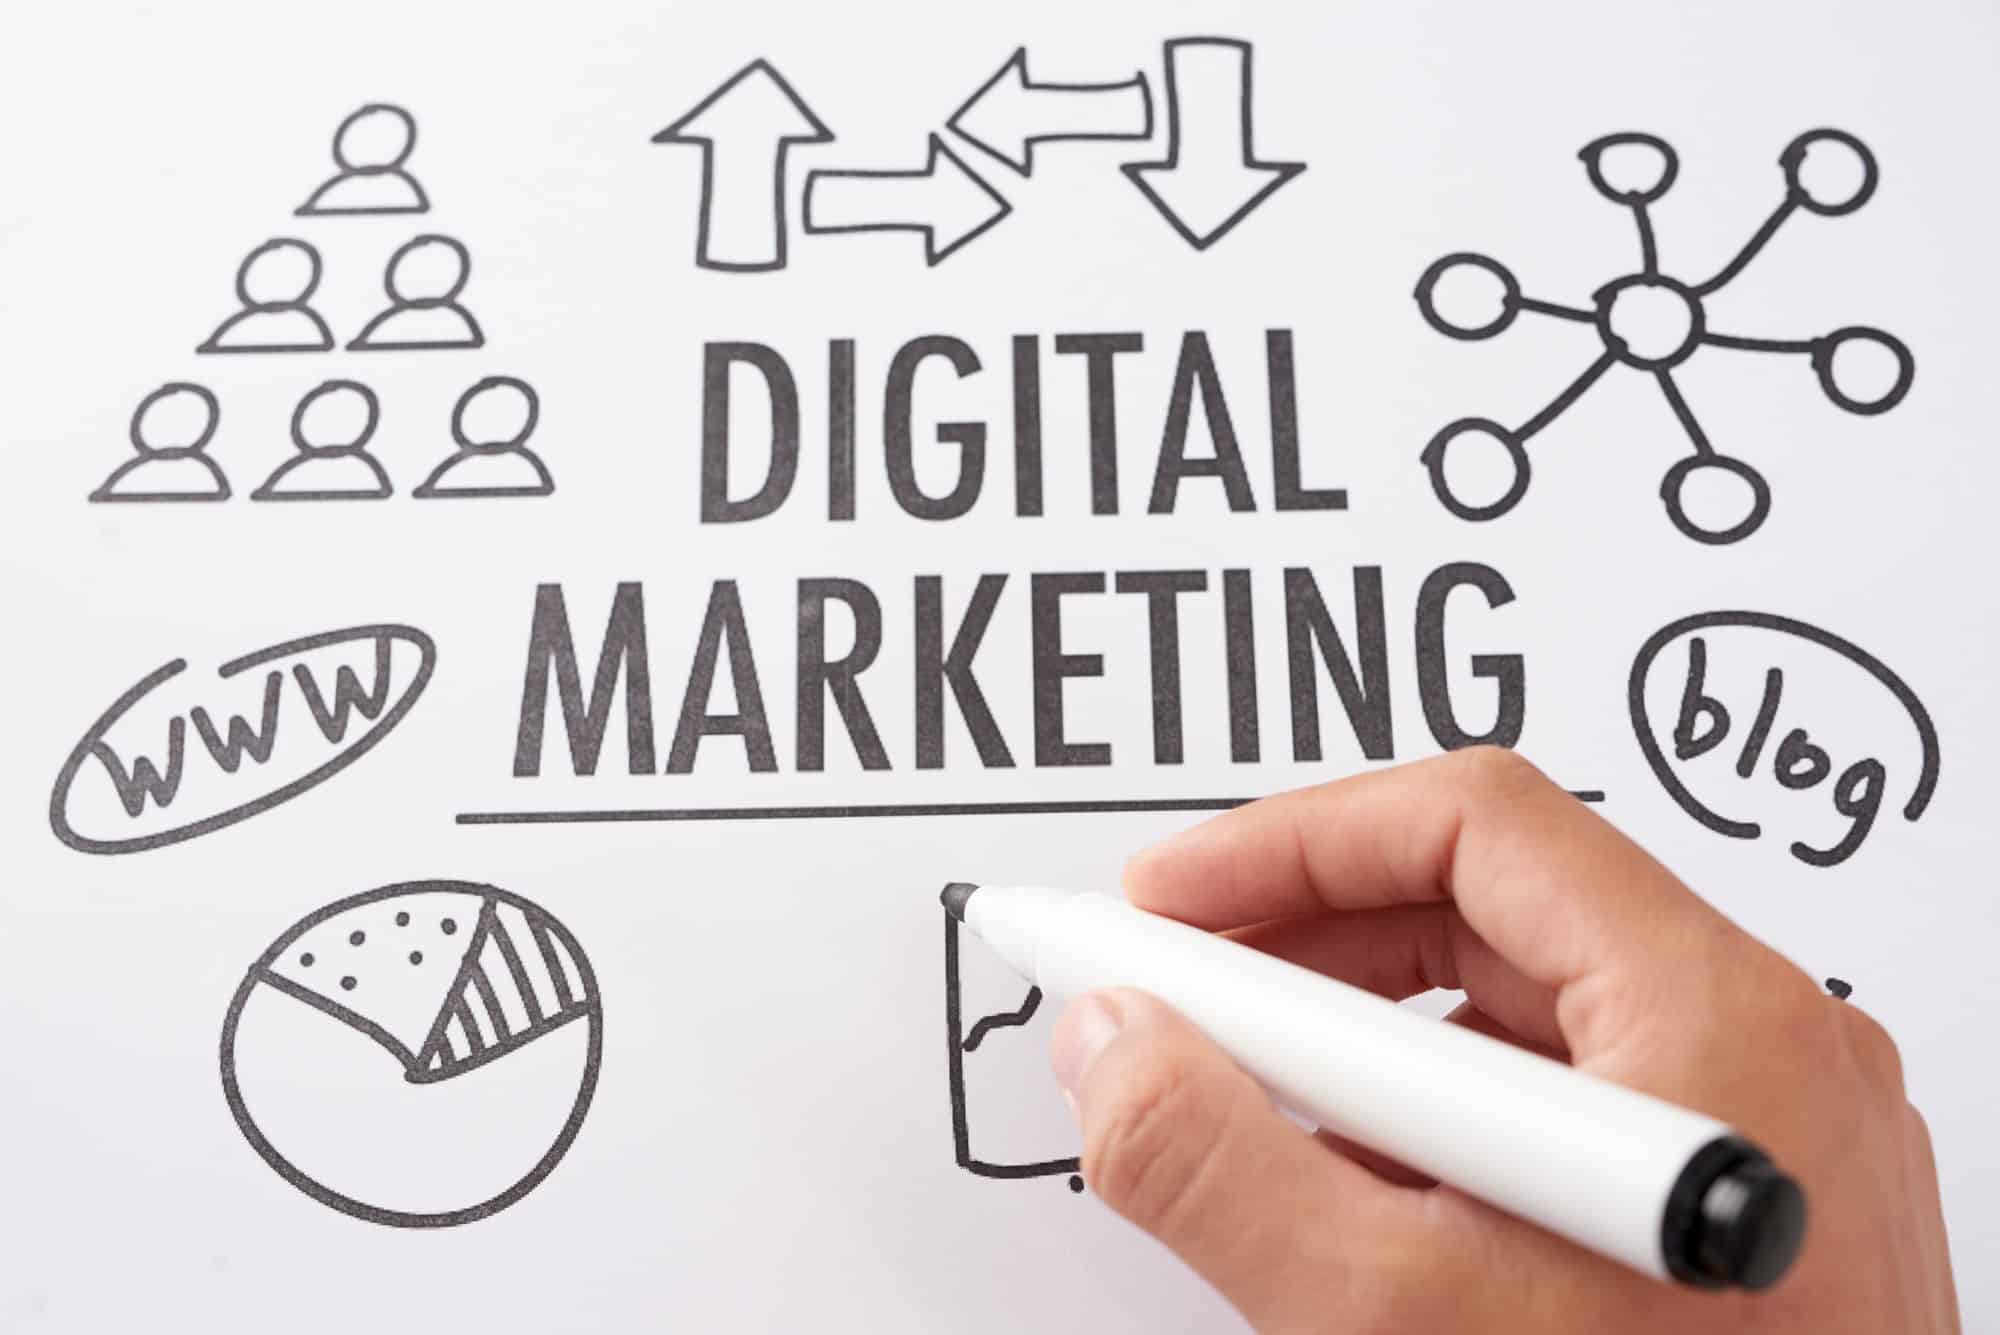 Overview of digital marketing for a home service business